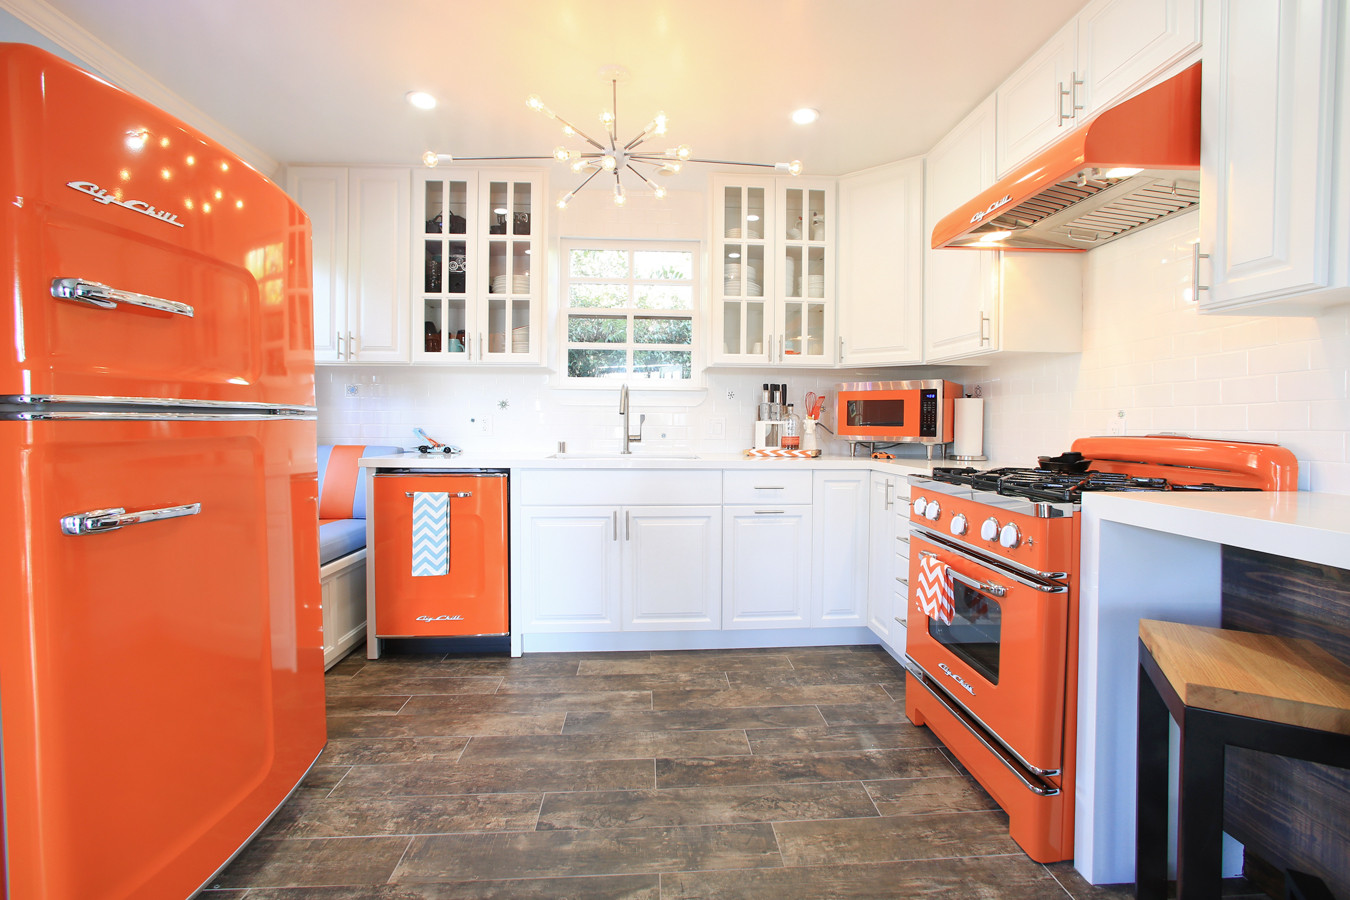 75 Orange Kitchen with Colored Appliances Ideas You'll Love